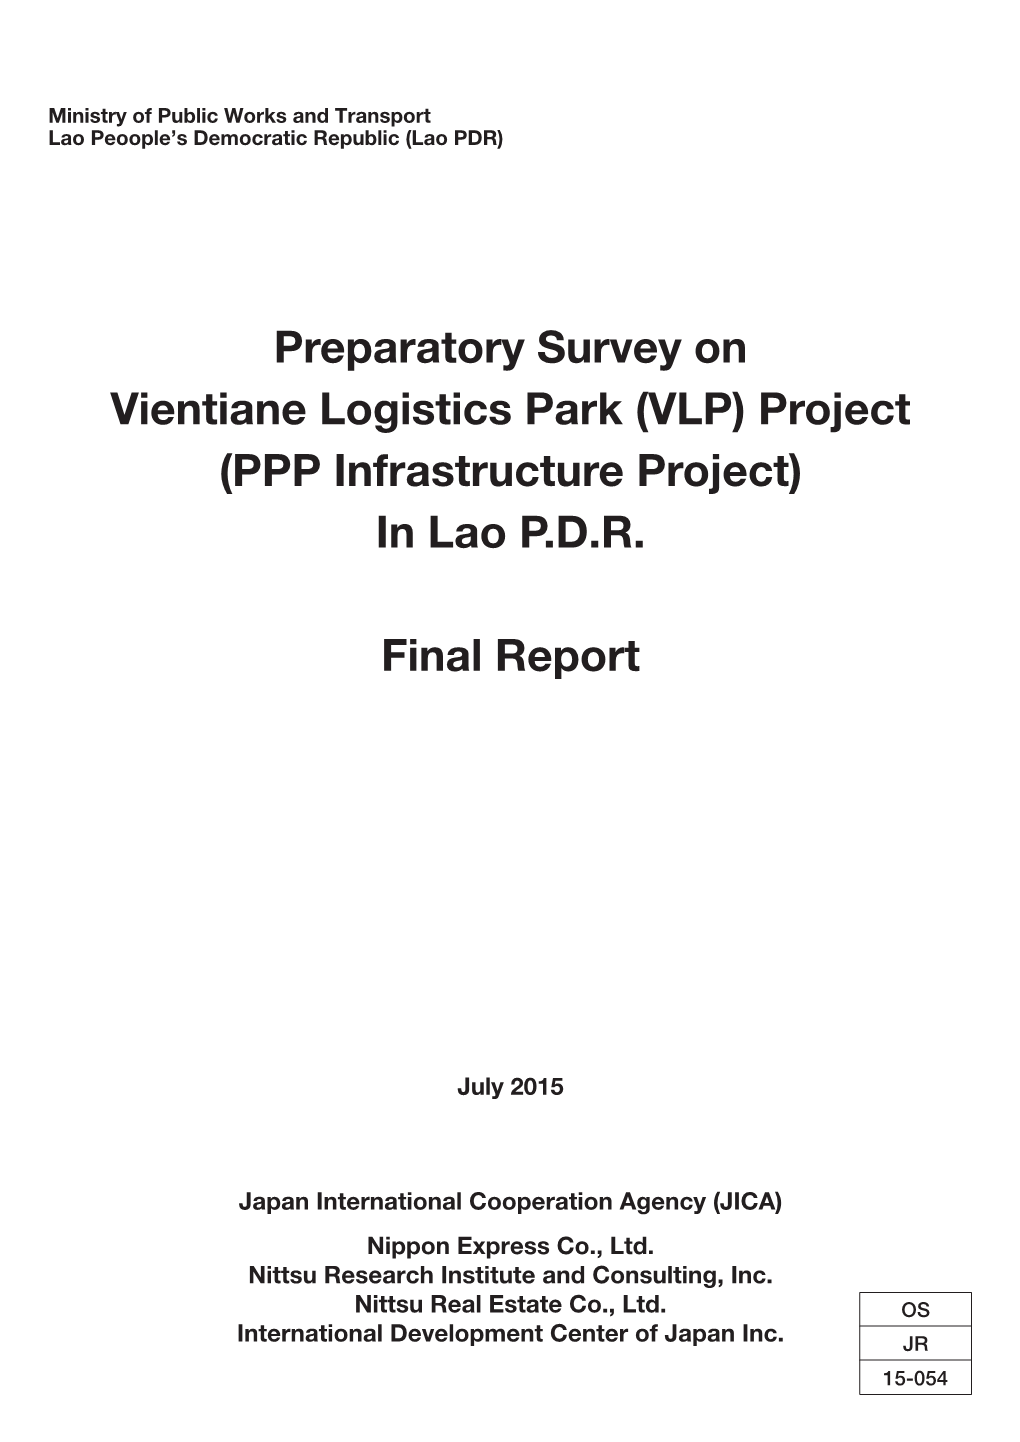 Preparatory Survey on Vientiane Logistics Park (VLP) Project (PPP Infrastructure Project) in Lao P.D.R